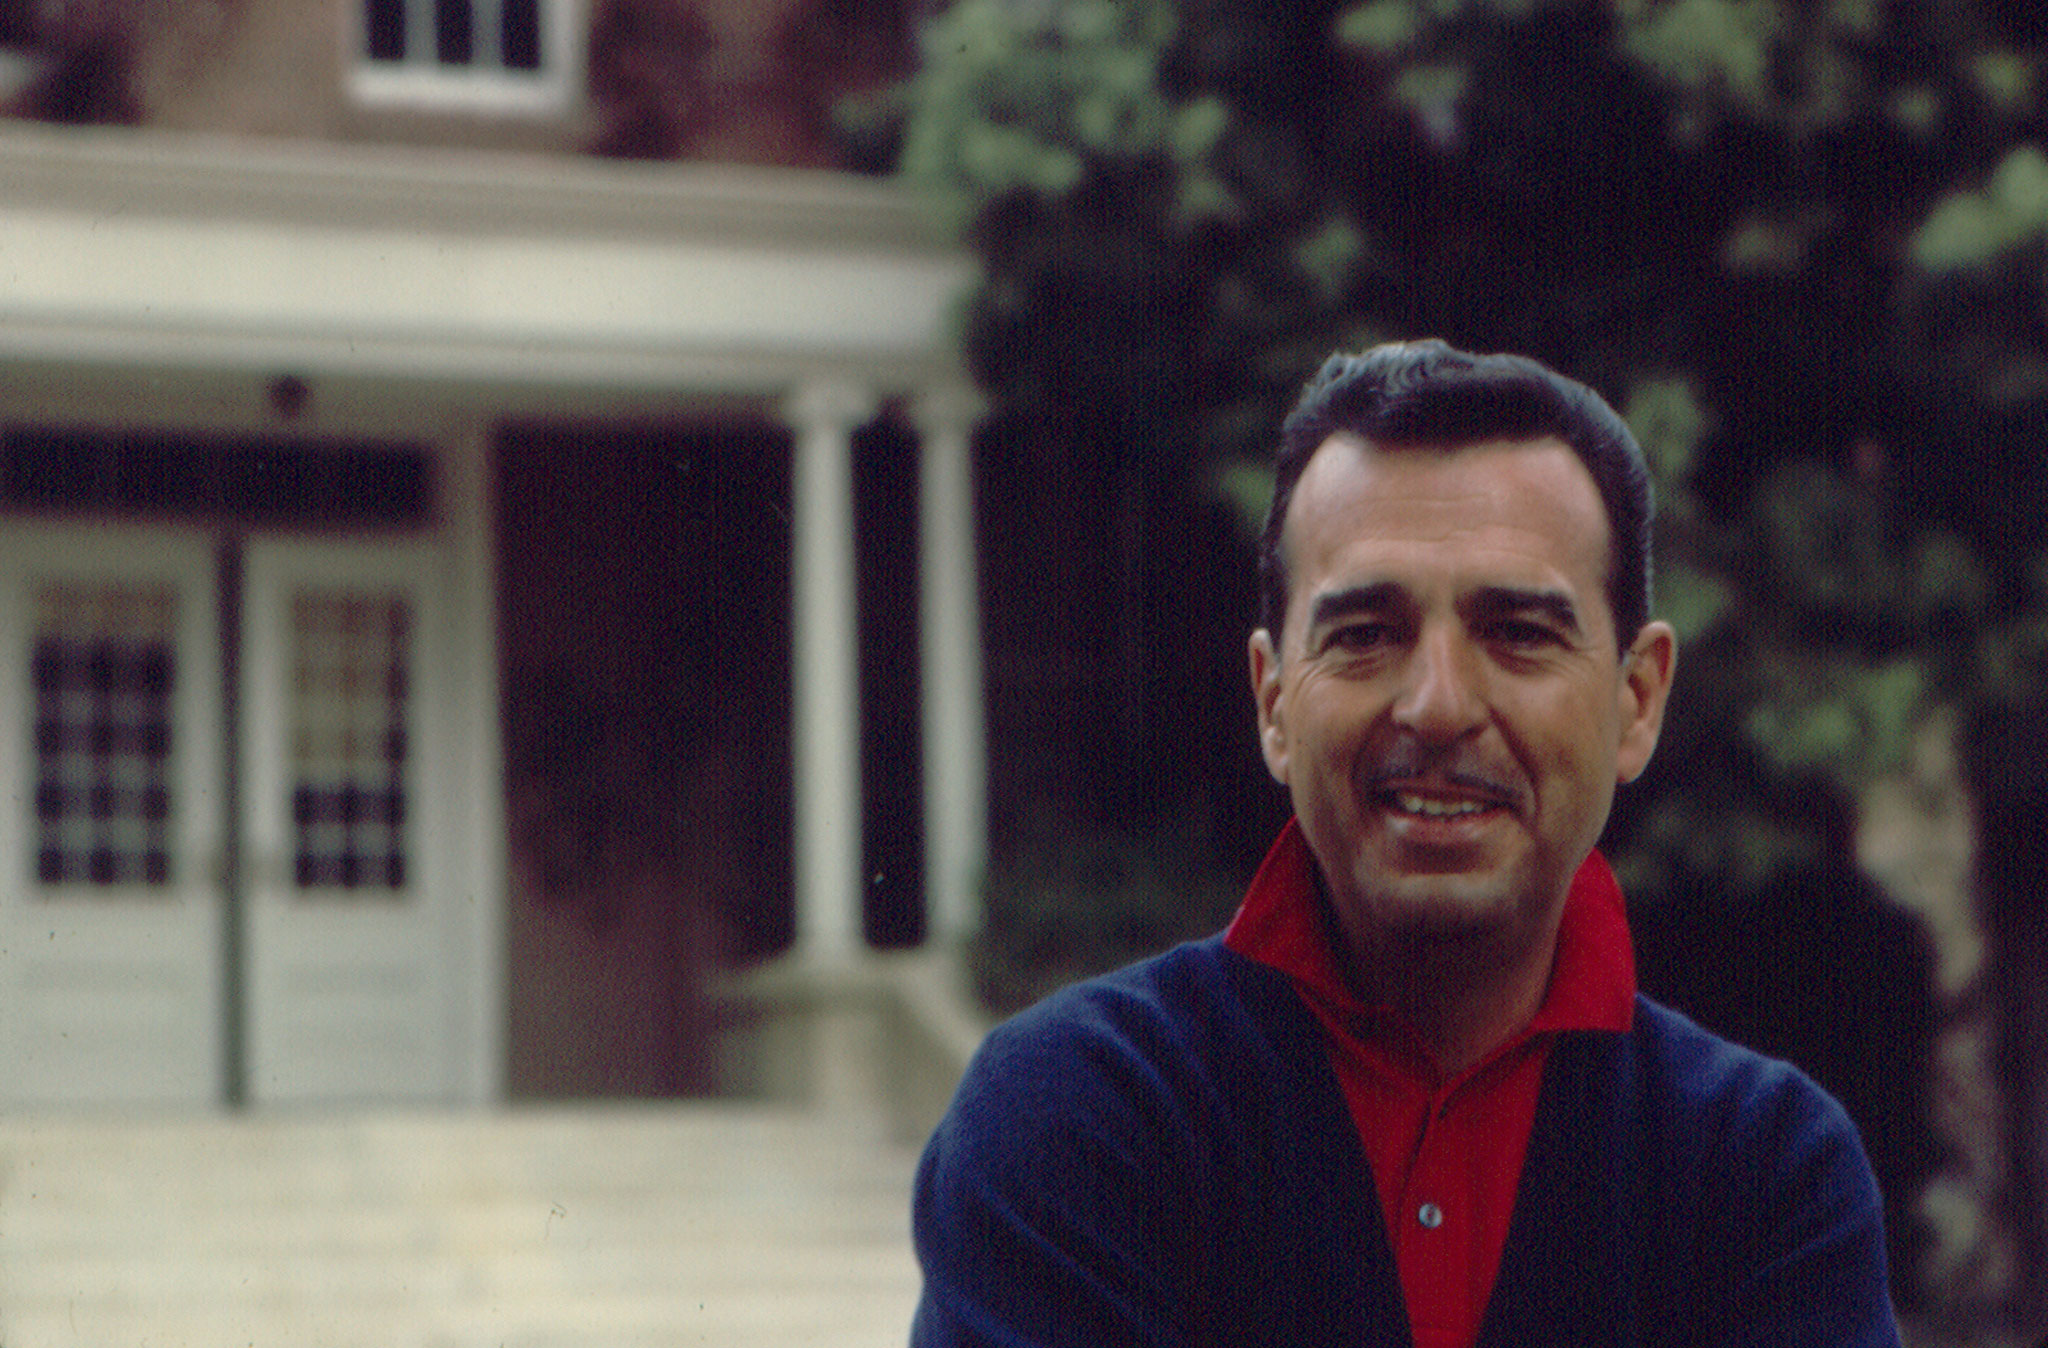 Special Screening: Tennessee Ernie Ford’s “Amazing Grace”